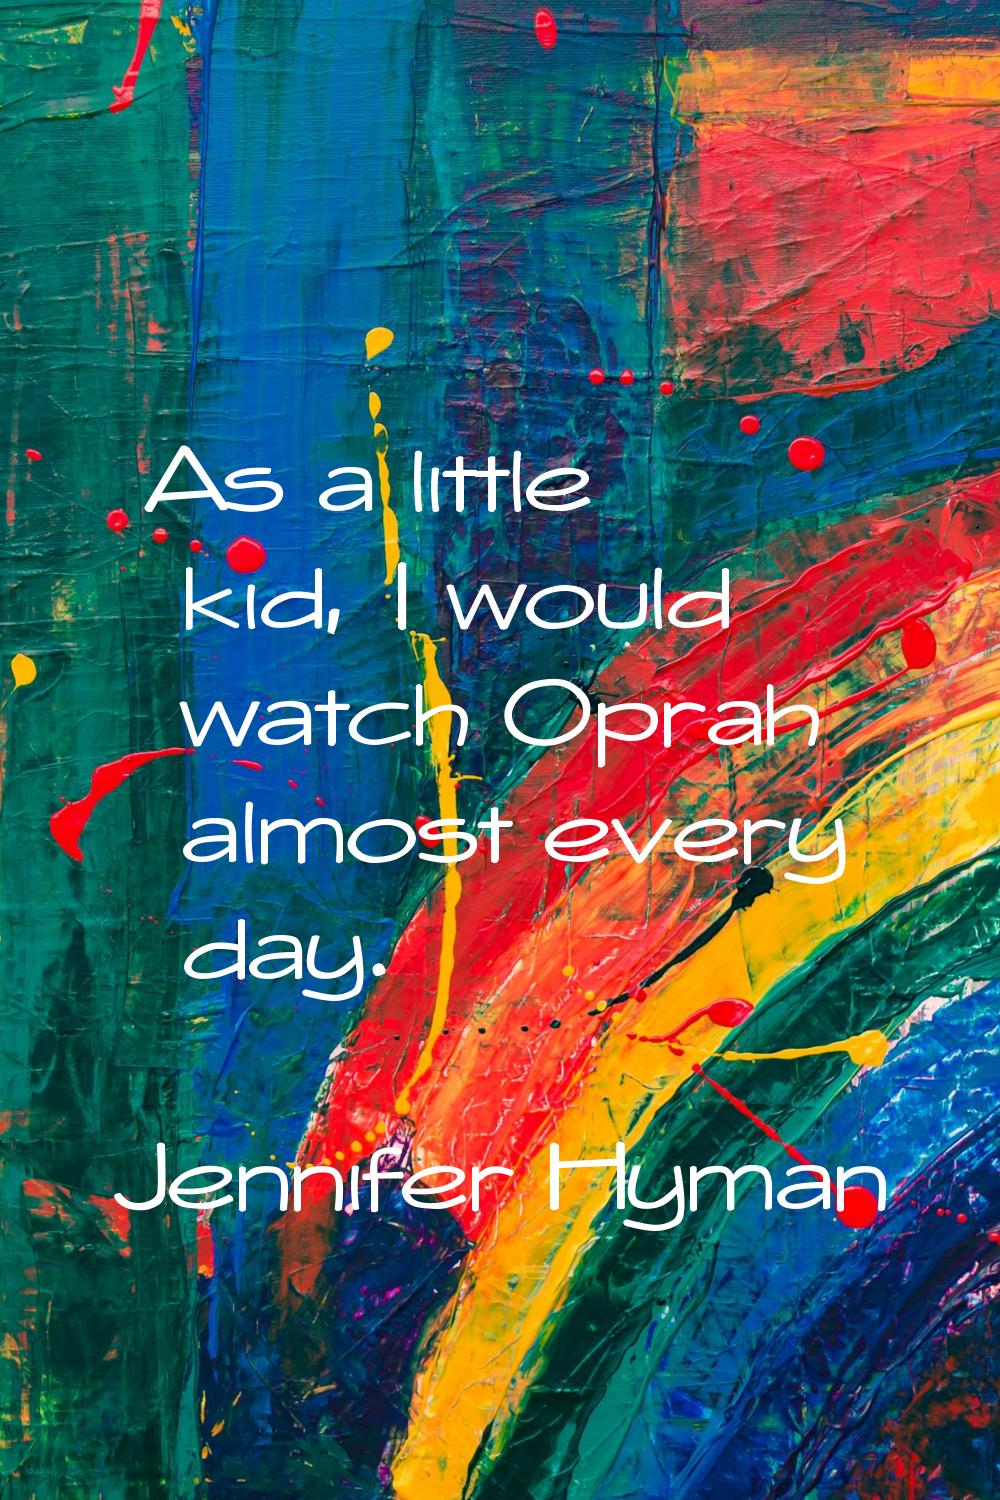 As a little kid, I would watch Oprah almost every day.